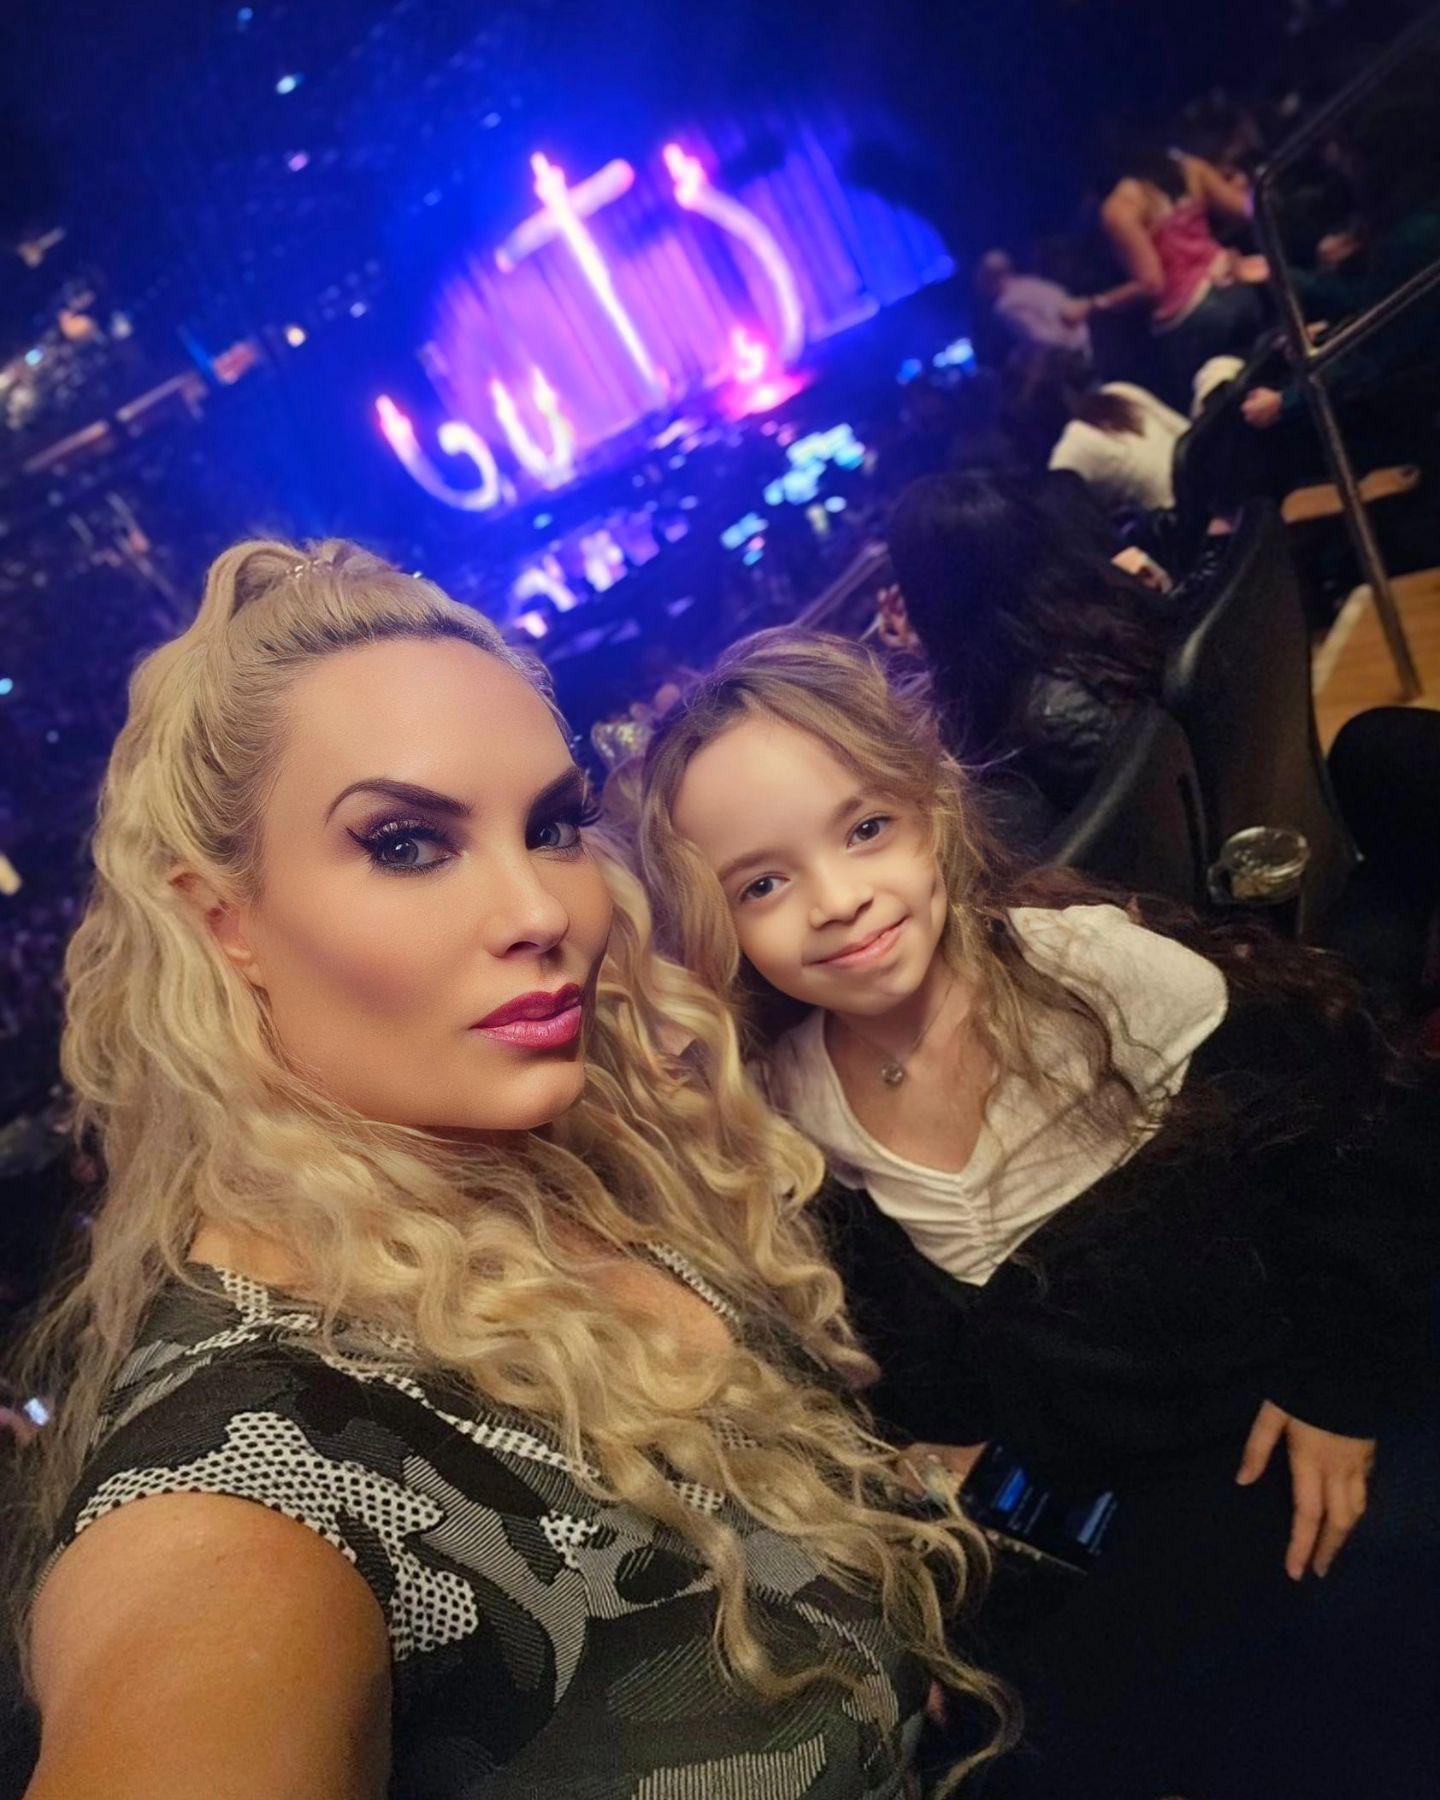 Went to @oliviarodrigo concert! This is Chanel's favorite singer!! We've been waiting for this moment since last September ( 8months ago) She is obsessed with her! Of course our girl crew came along!
-swipe
#springbreak